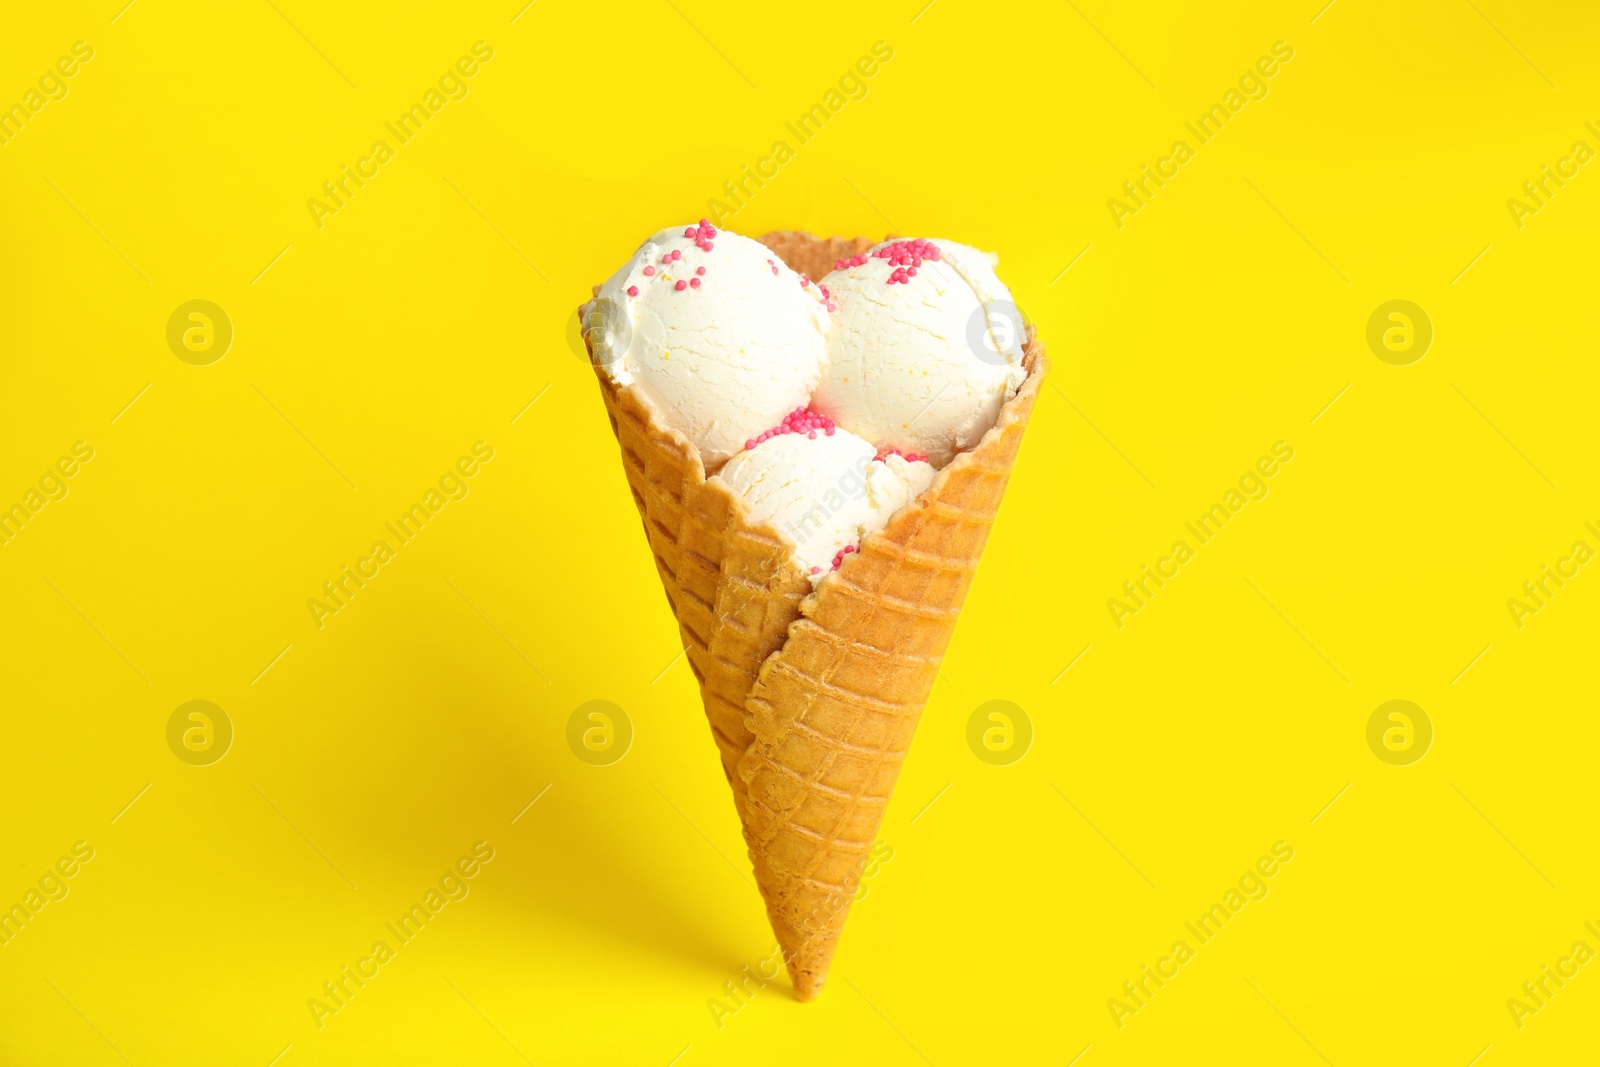 Photo of Delicious vanilla ice cream in wafer cone on yellow background